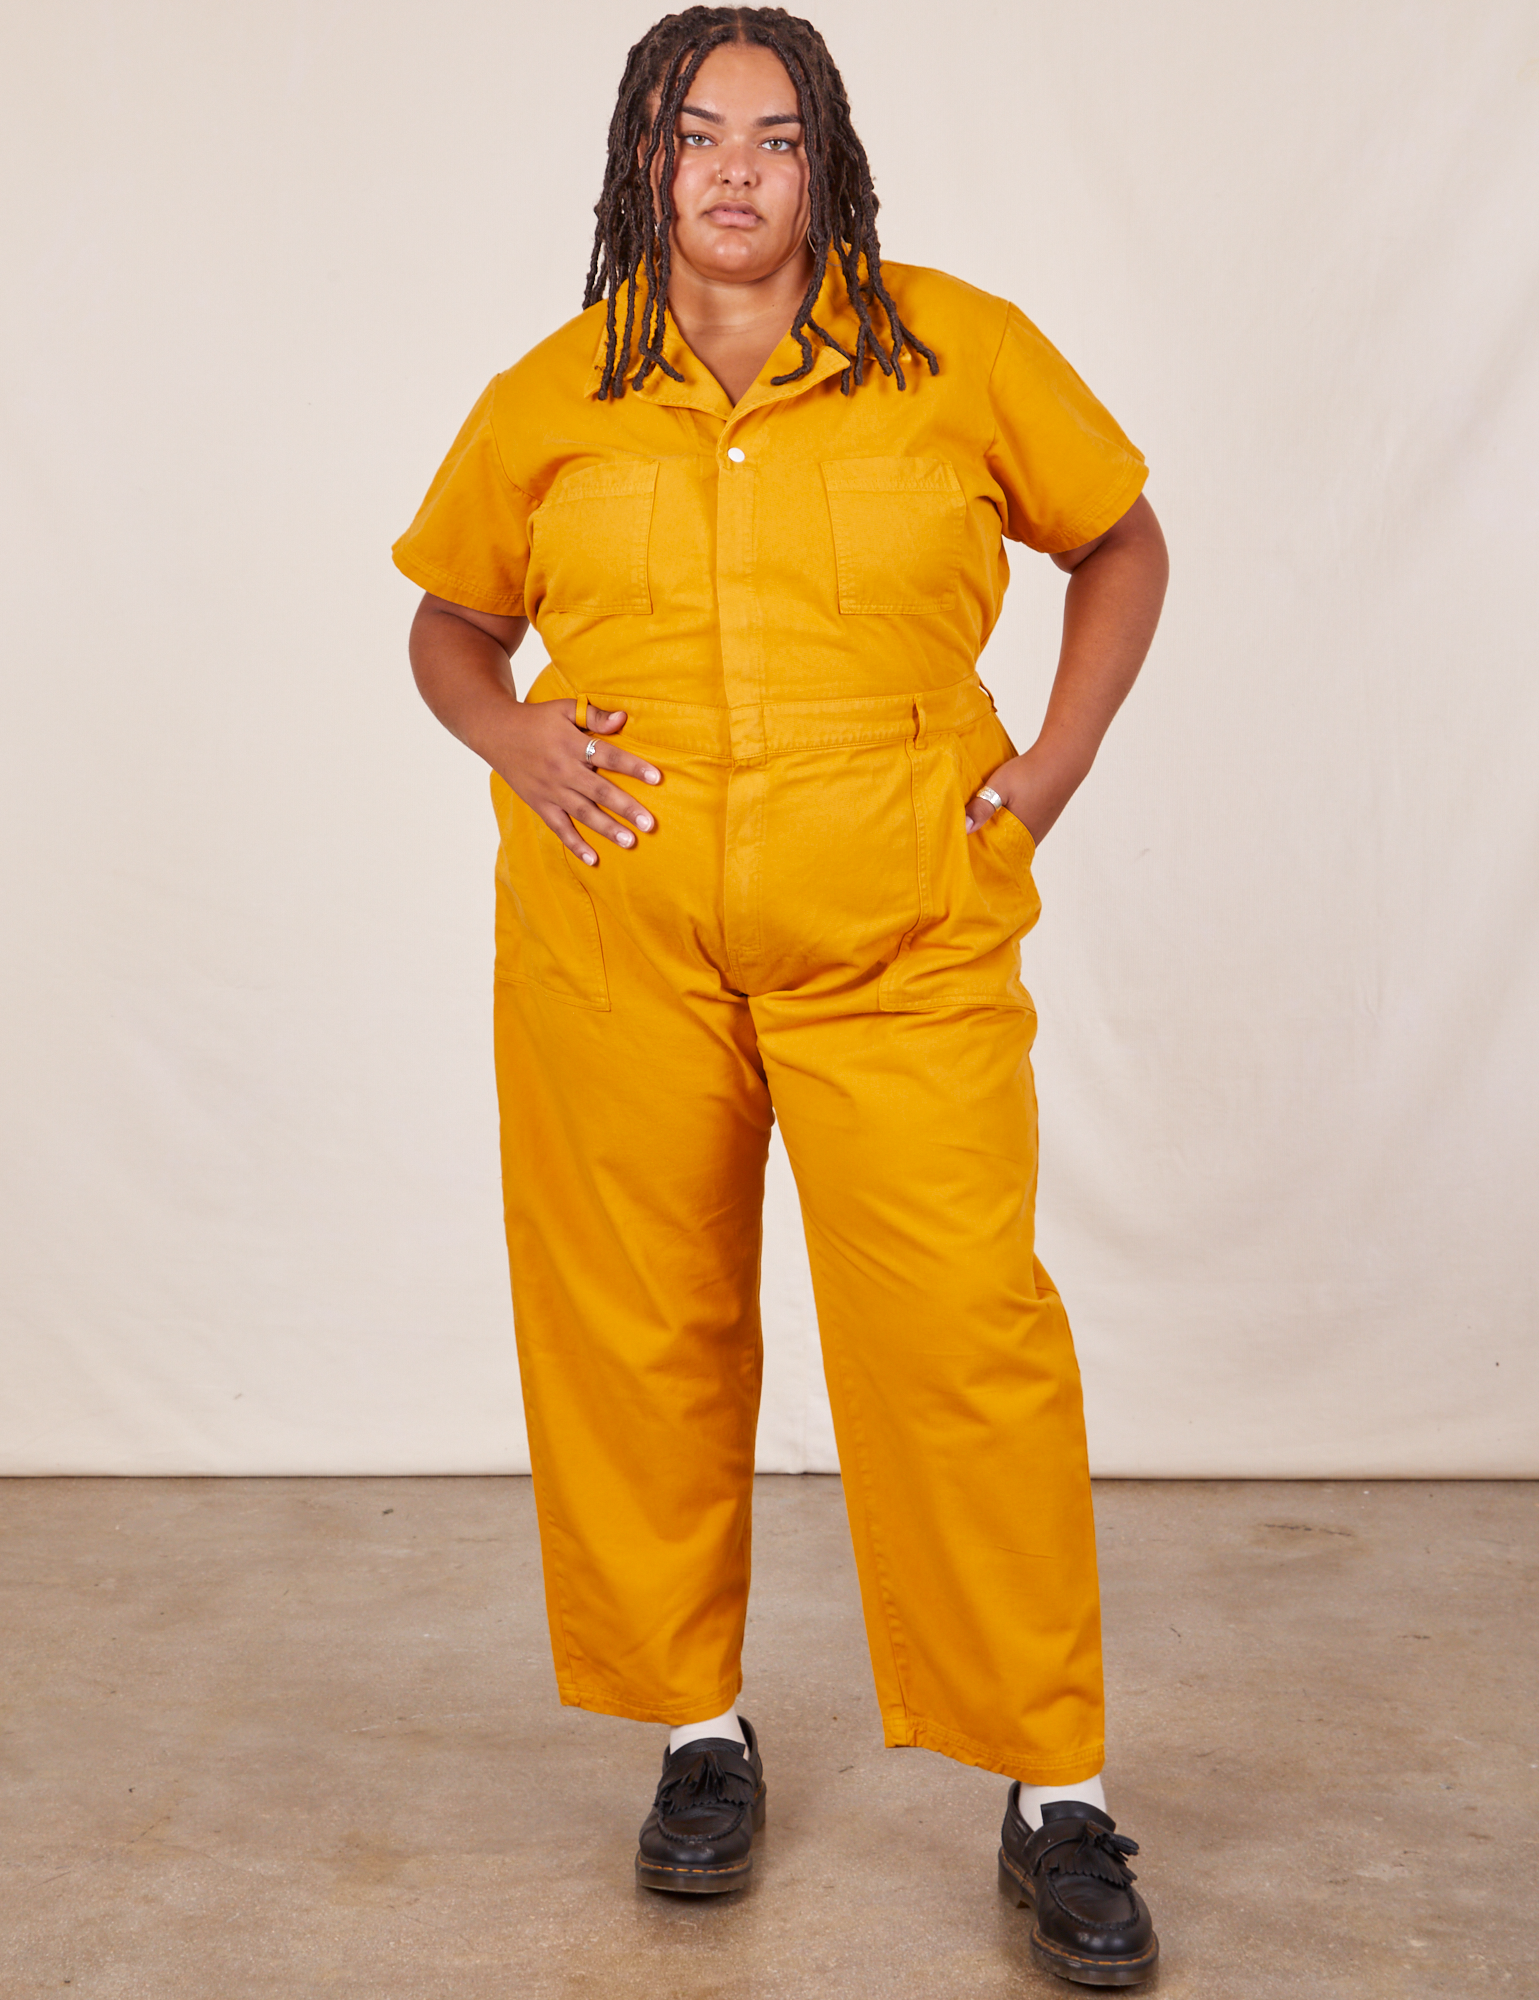 Alicia is 5’9” and wearing 2XLShort Sleeve Jumpsuit in Mustard Yellow